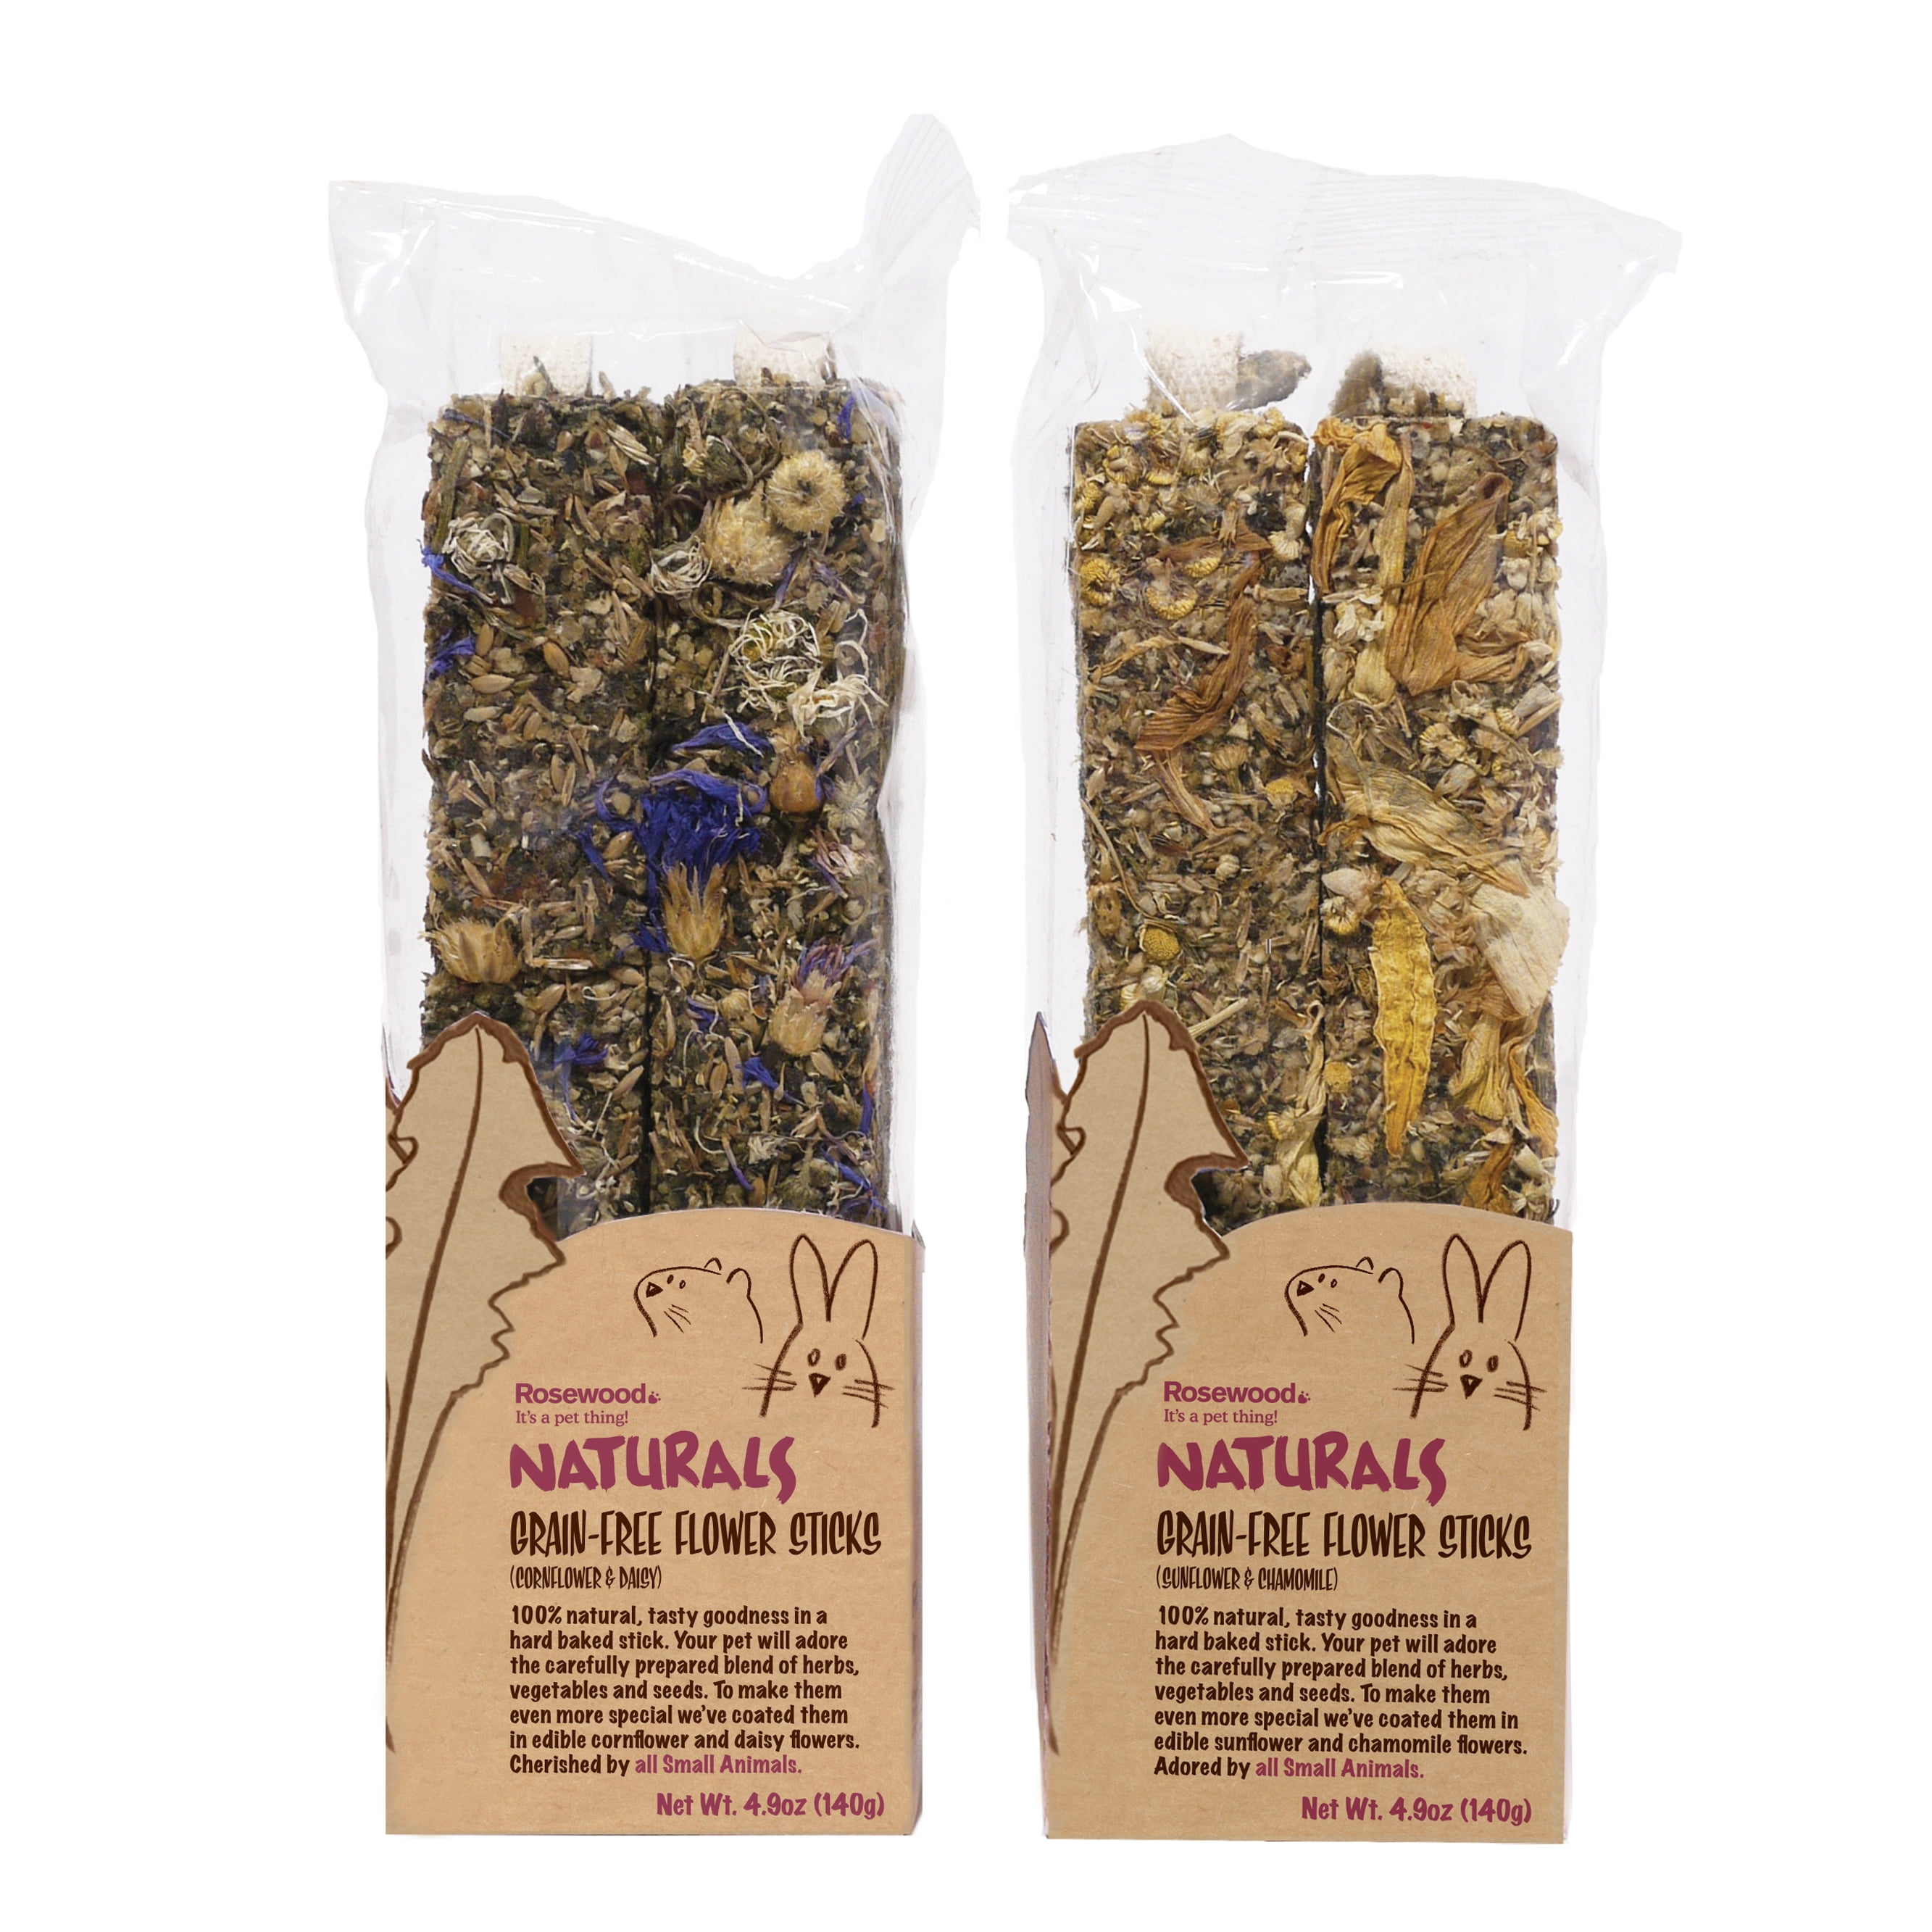 Rosewood Naturals Small Animal Grain-free Flower Sticks (assorted)